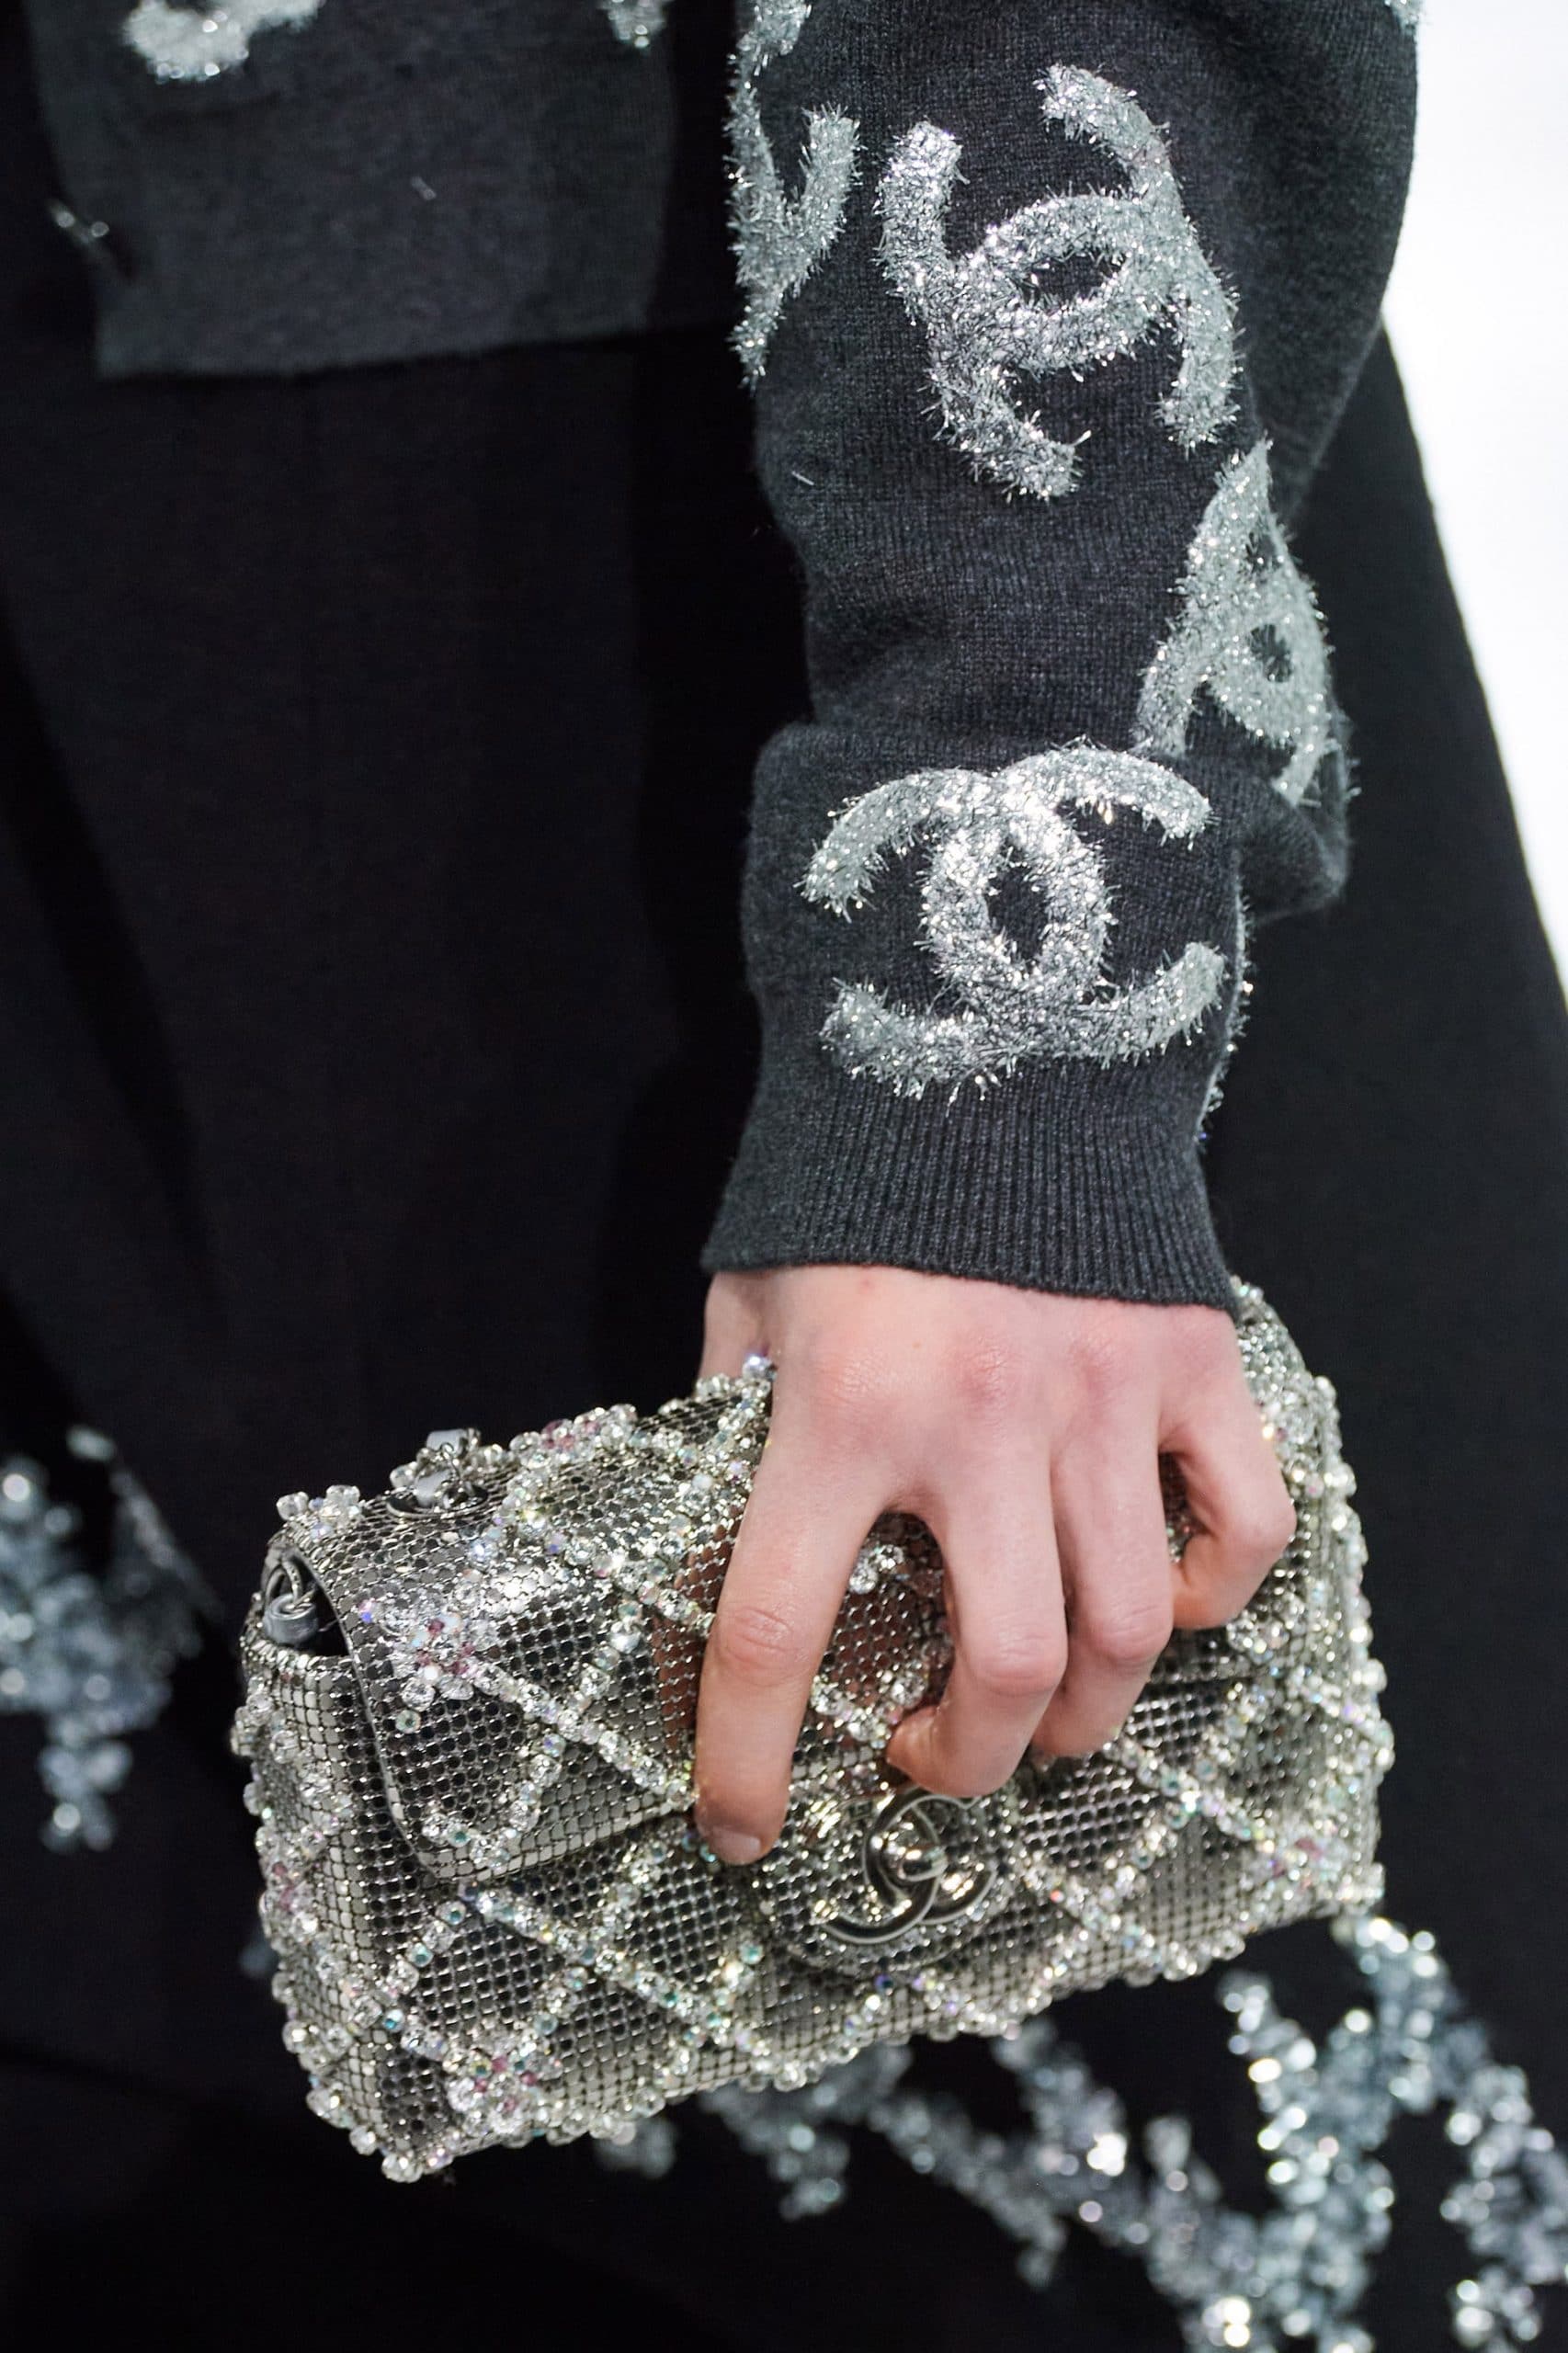 Chanel Sequined Clutch